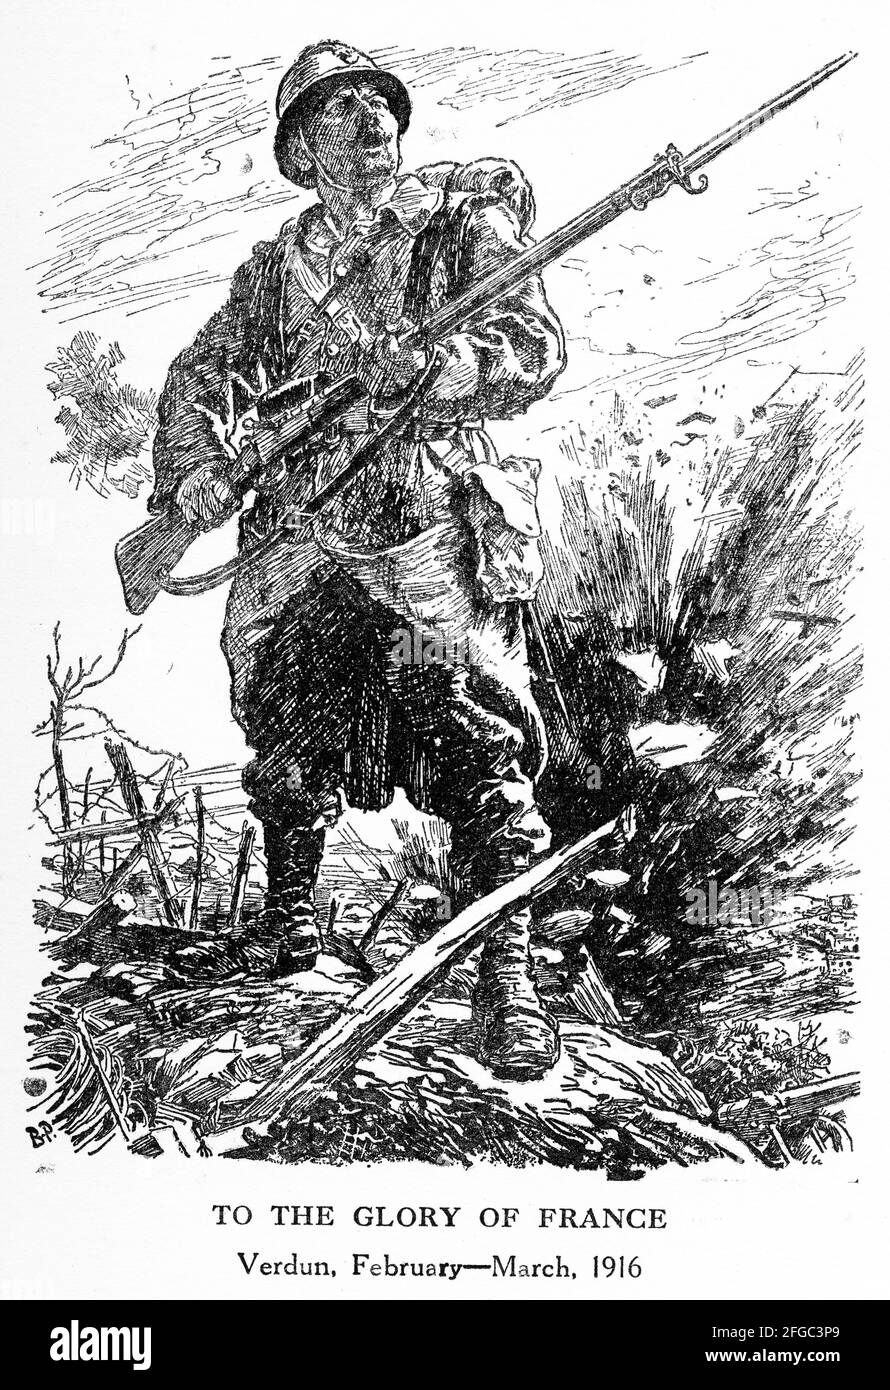 Engraving to encourage France after the battle of Verdun  during World War One. From Punch magazine. Stock Photo